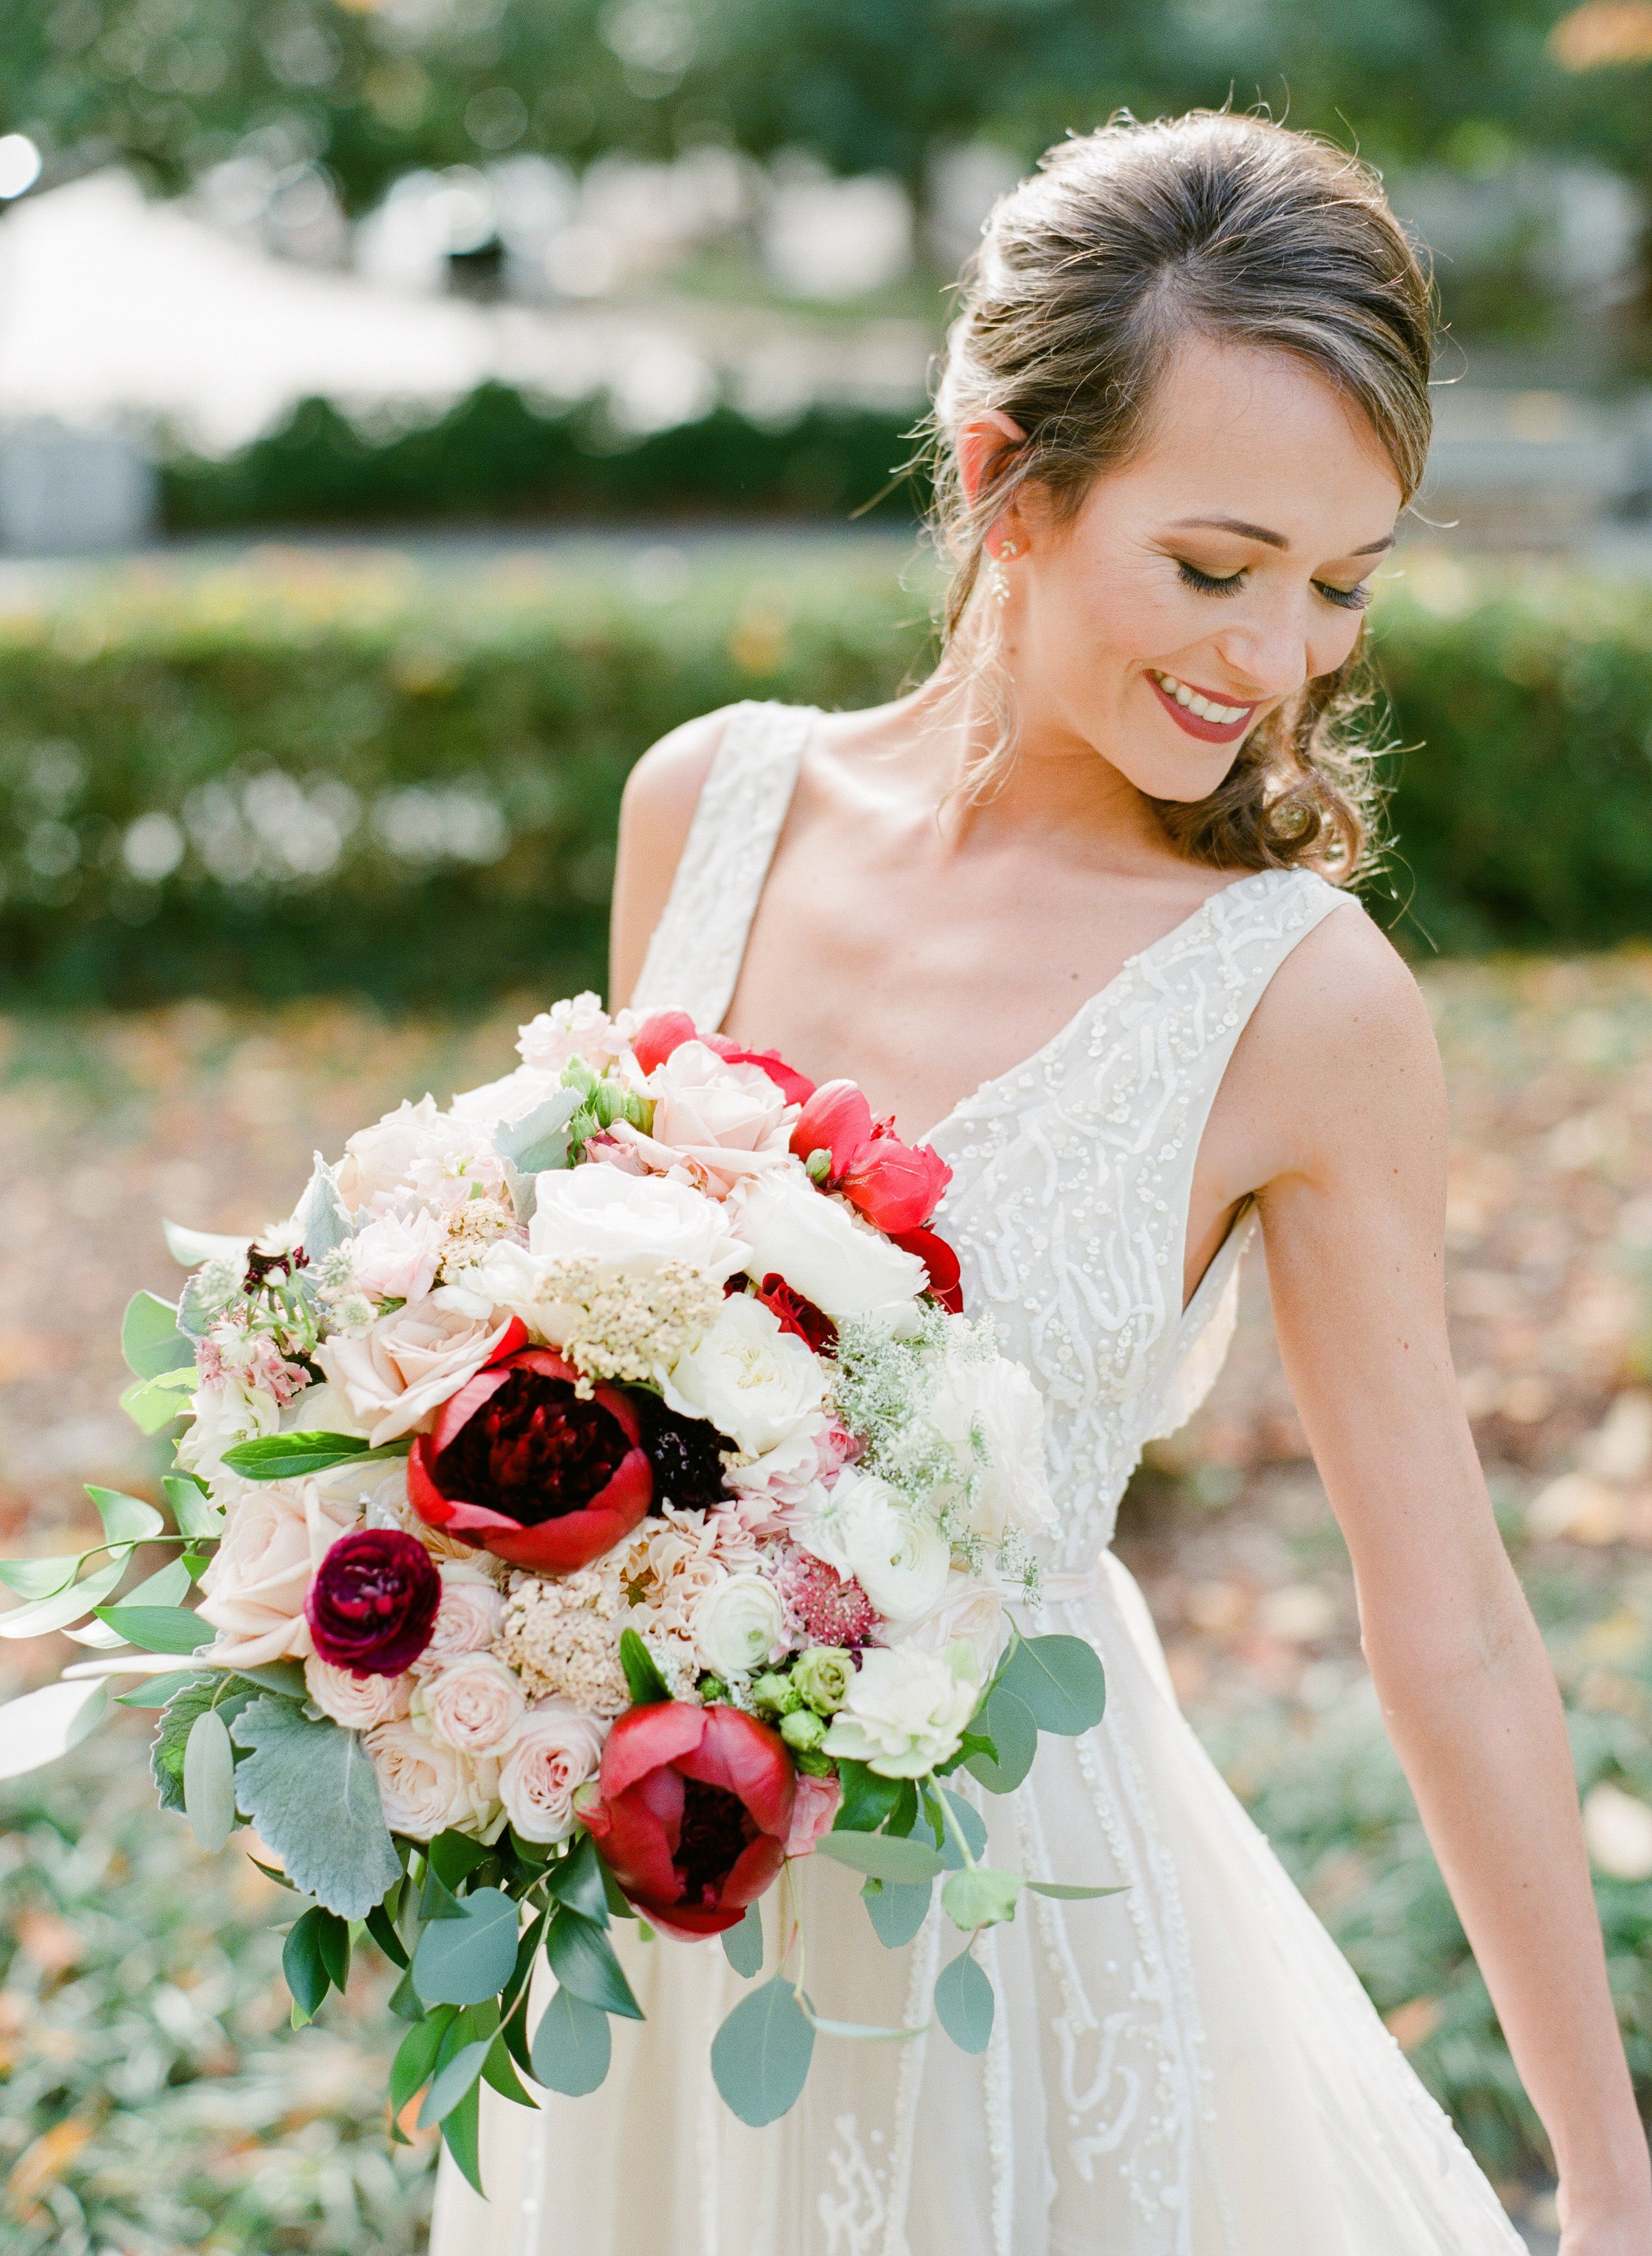 ivory-and-beau-bridal-boutique-savannah-wedding-planner-the-happy-bloom-photography-bethesda-academy-wedding-morris-center-wedding-savannah-wedding-1.jpg